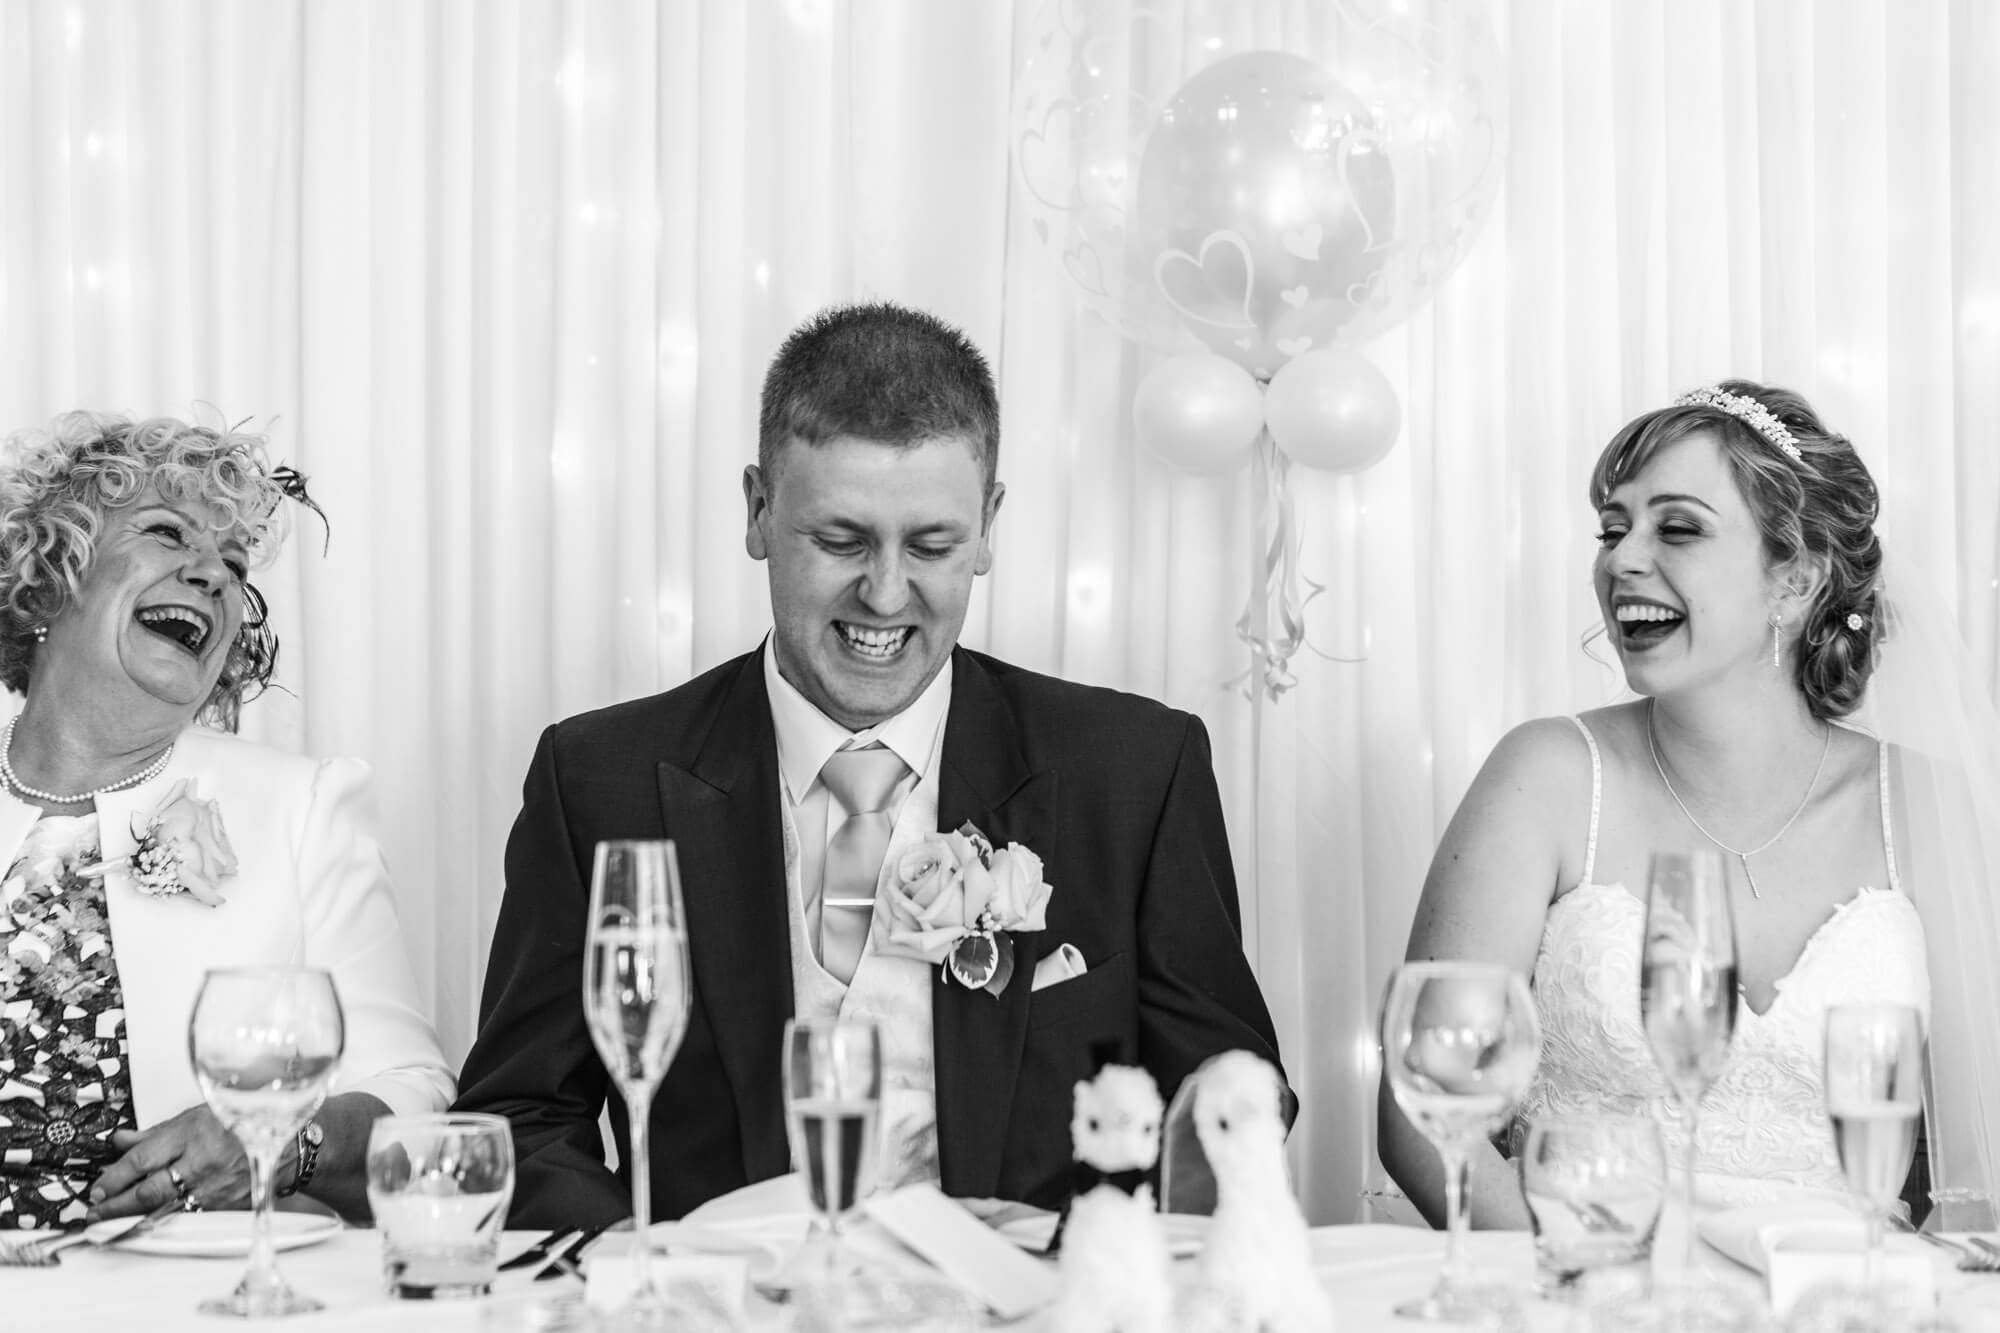 the bride and groom share a joke with his mother as they sit at table